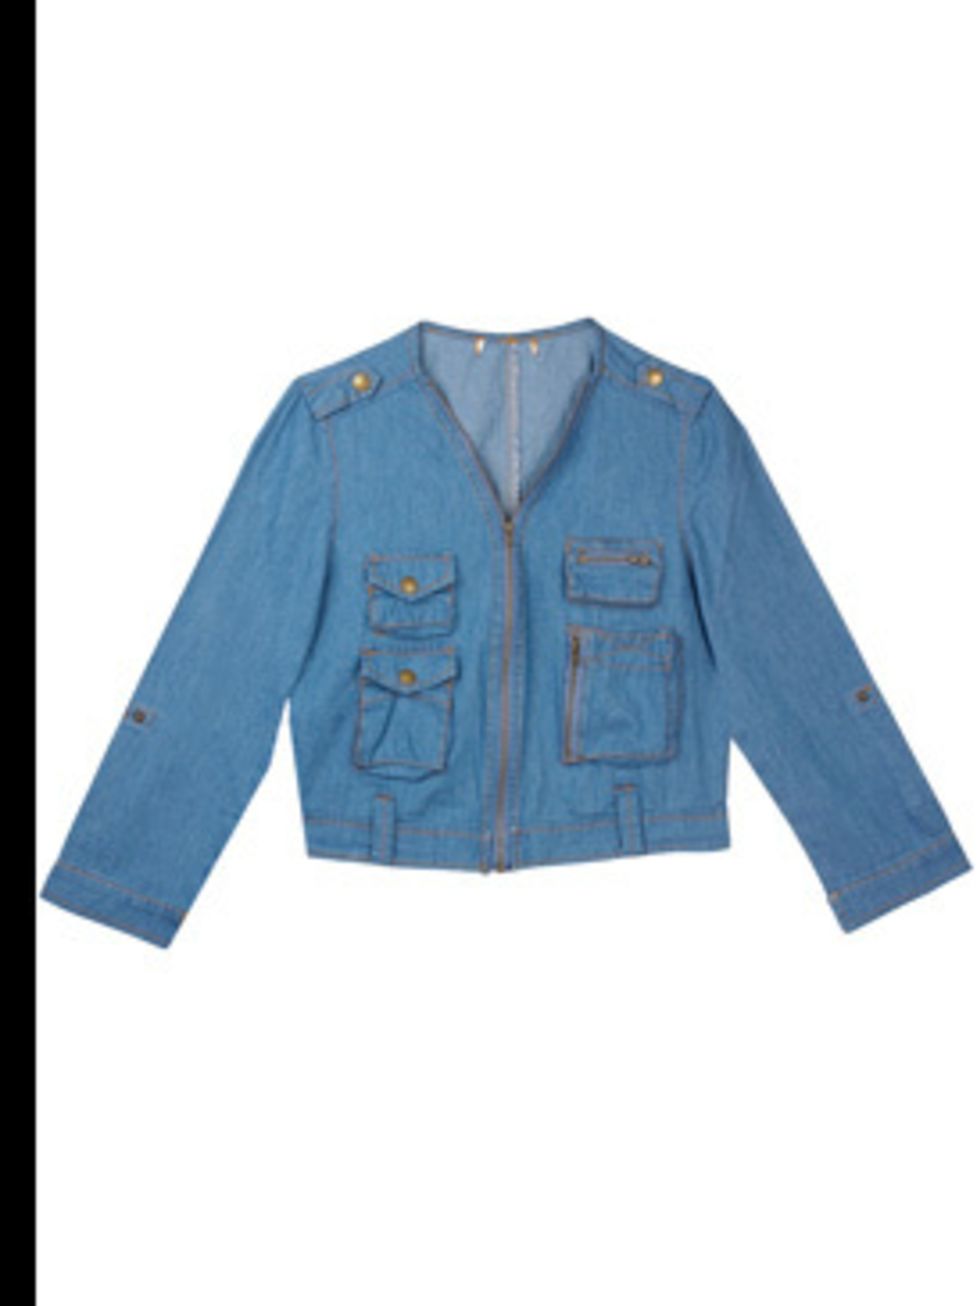 <p>Jacket, £46 by <a href="http://www.urbanoutfitters.co.uk/Shop/Womens/icat/womens">Urban Outfitters</a></p>